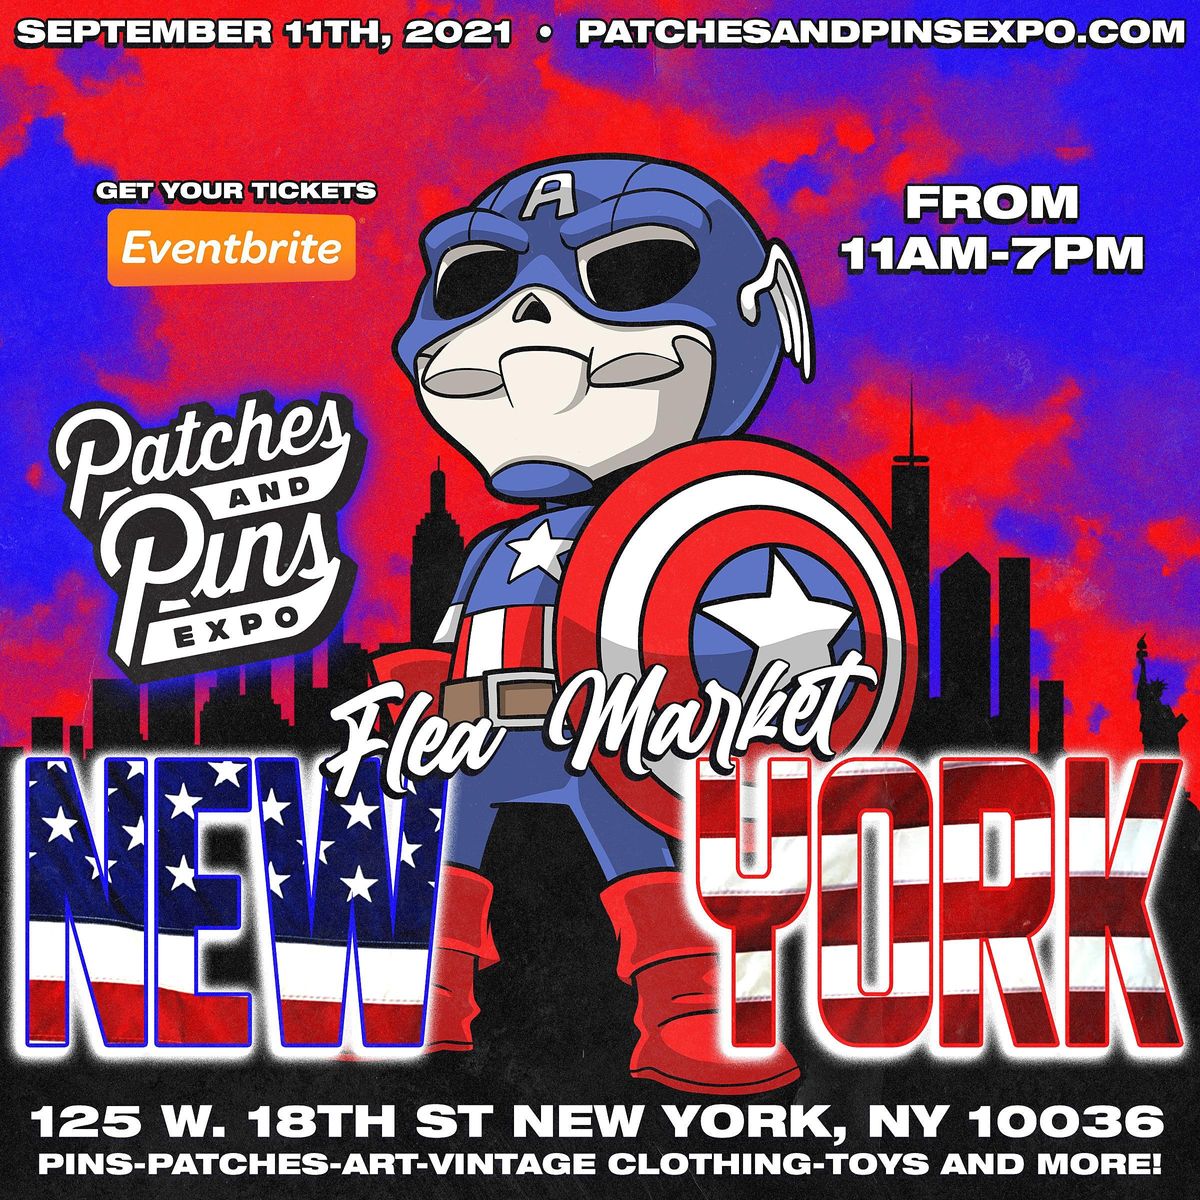 Patches & Pins Expo NYC "9\/11 =20 Year Anniversary"